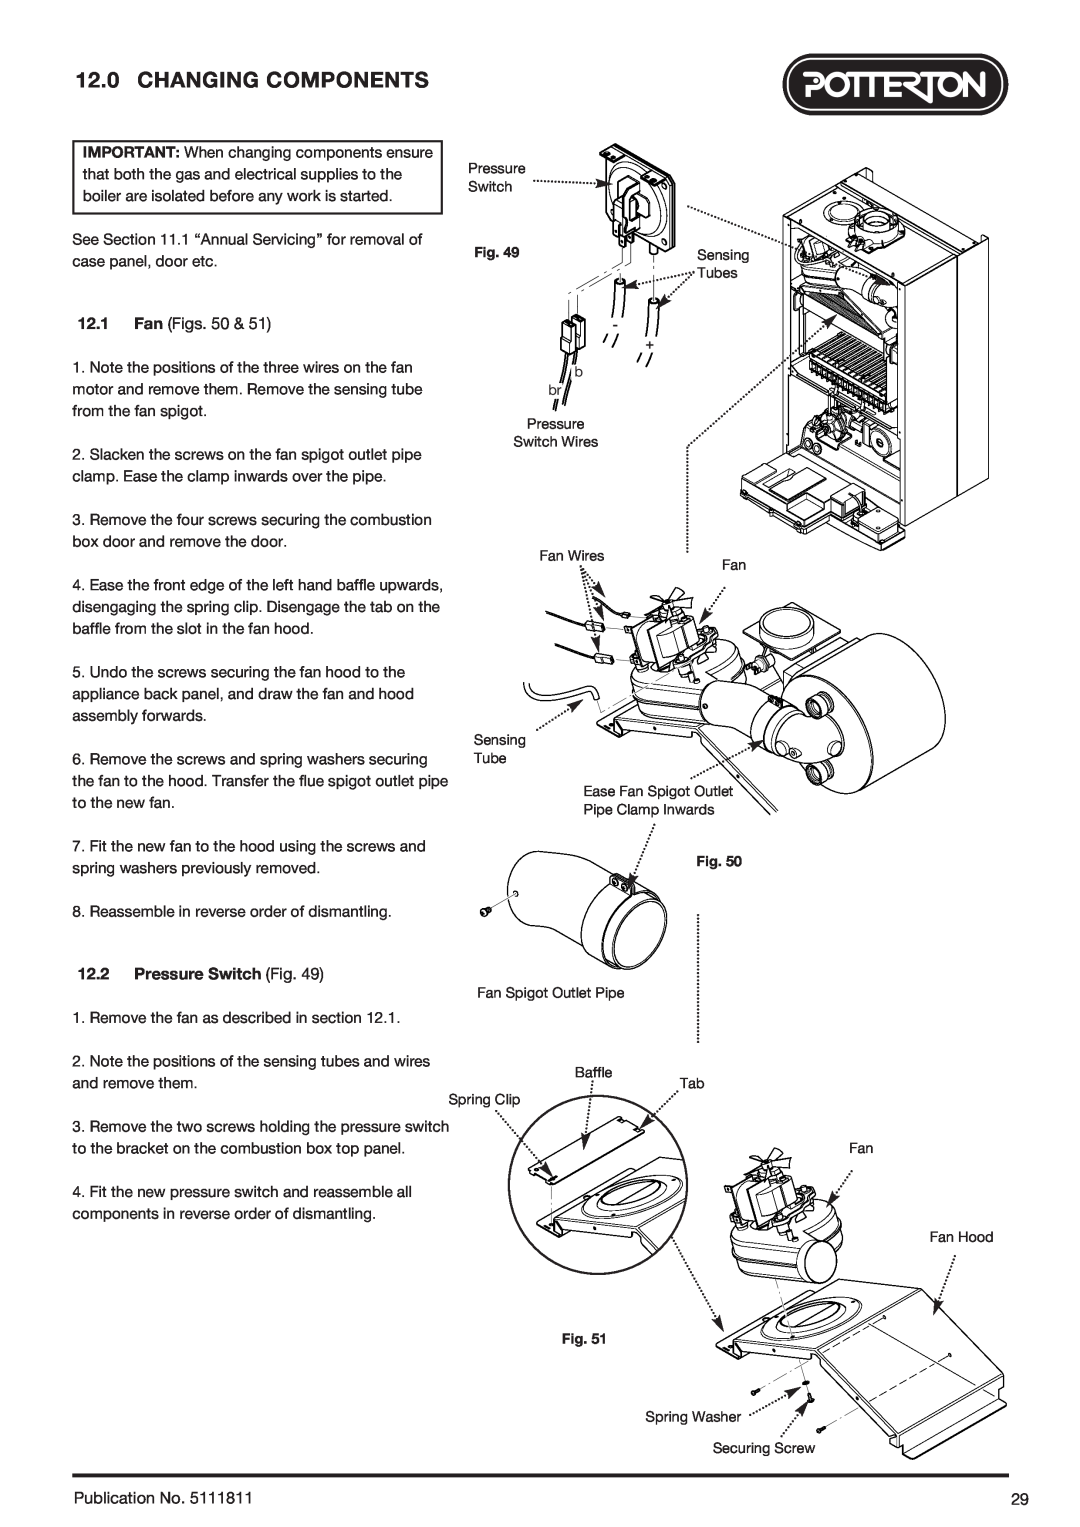 Baxi Potterton 24 Eco HE manual Changing Components, Fan Figs. 50, Pressure Switch Fig, Publication No 